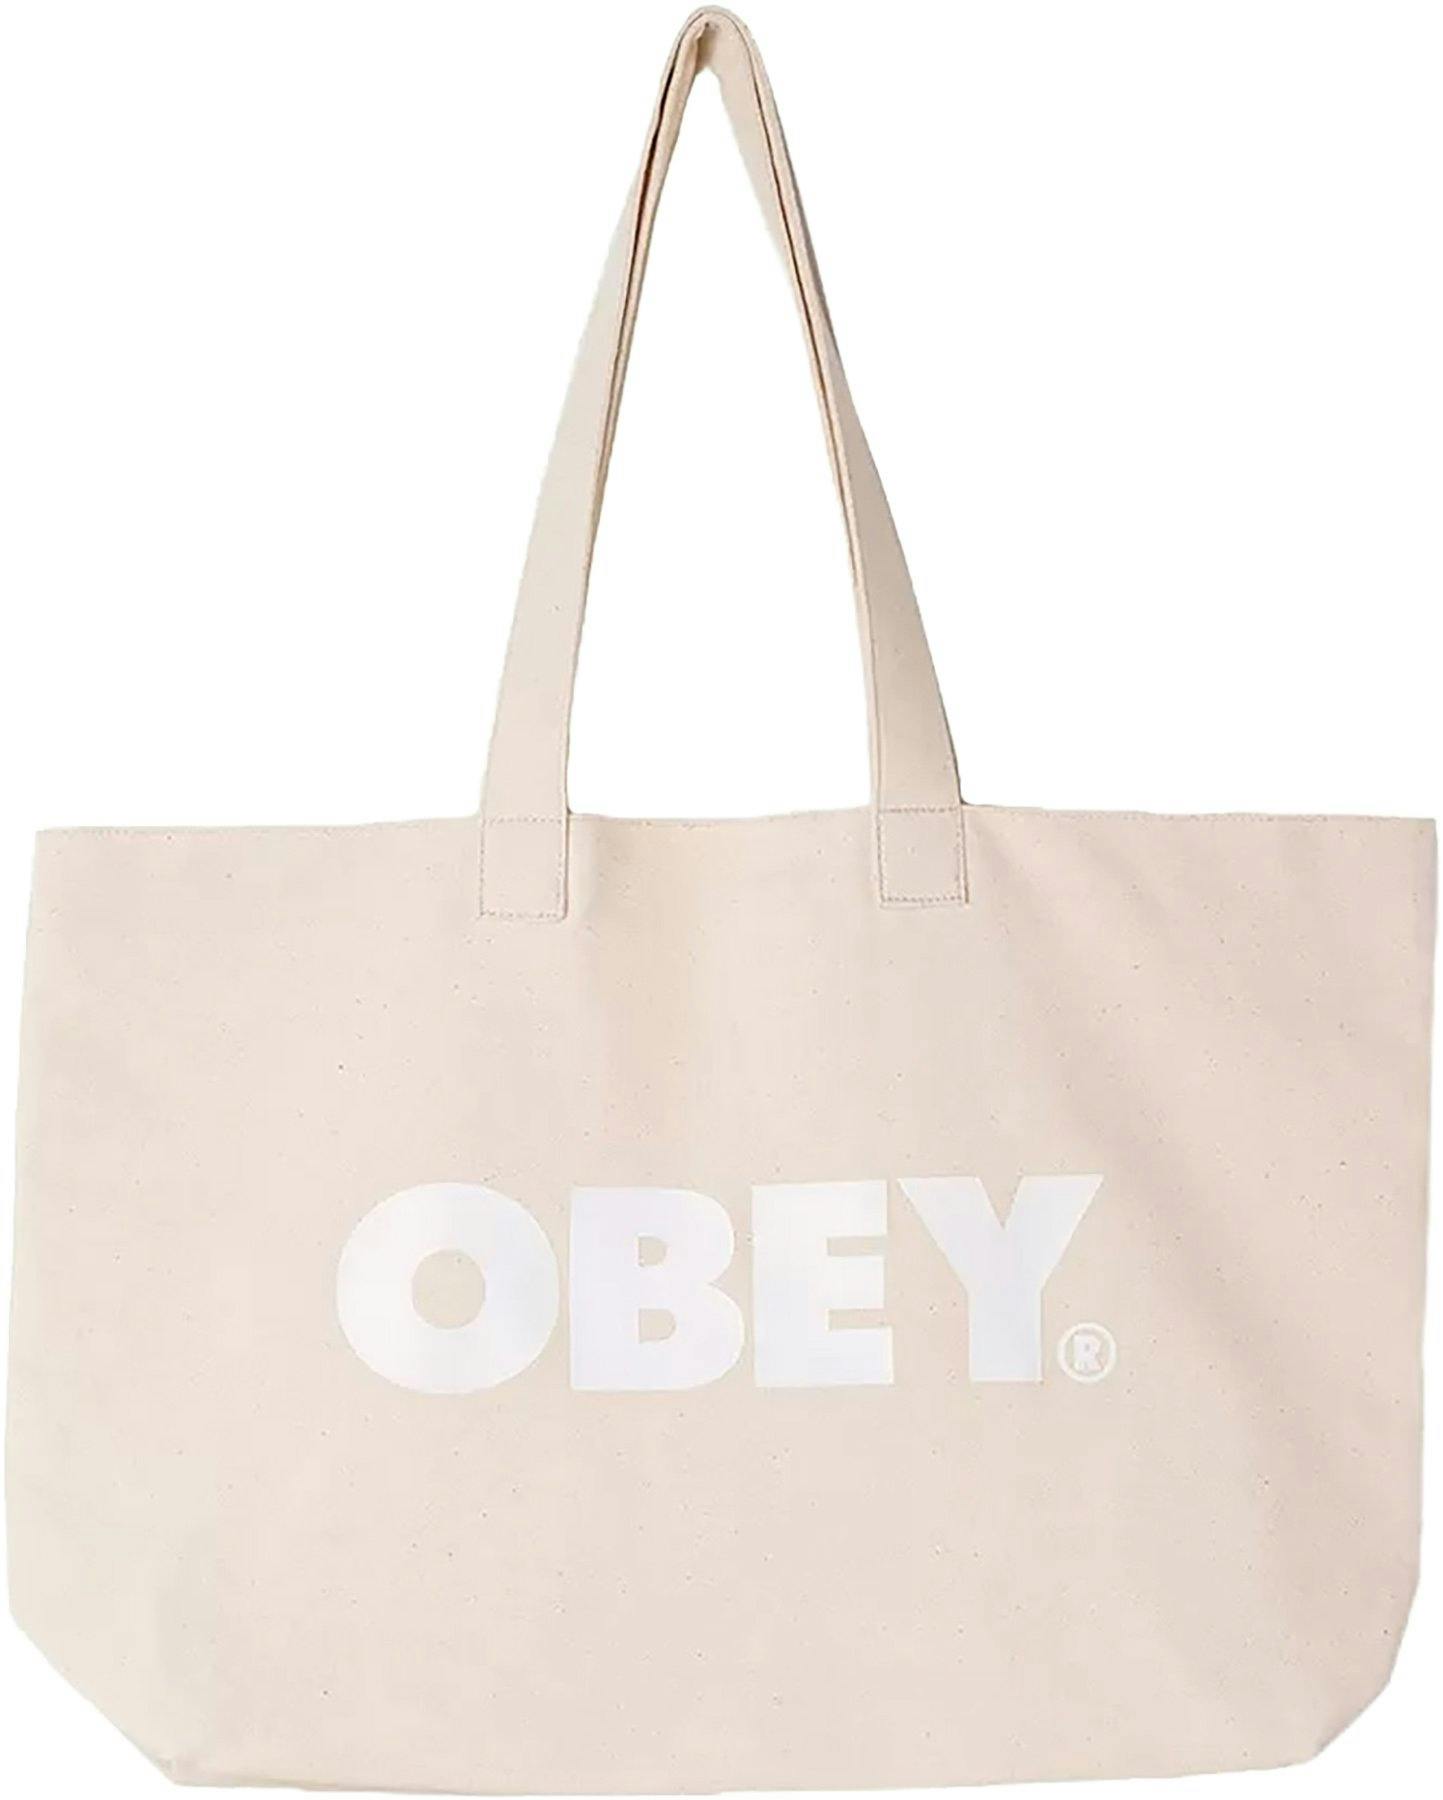 Product image for Obey Canvas Tote Bag 10L - Women's